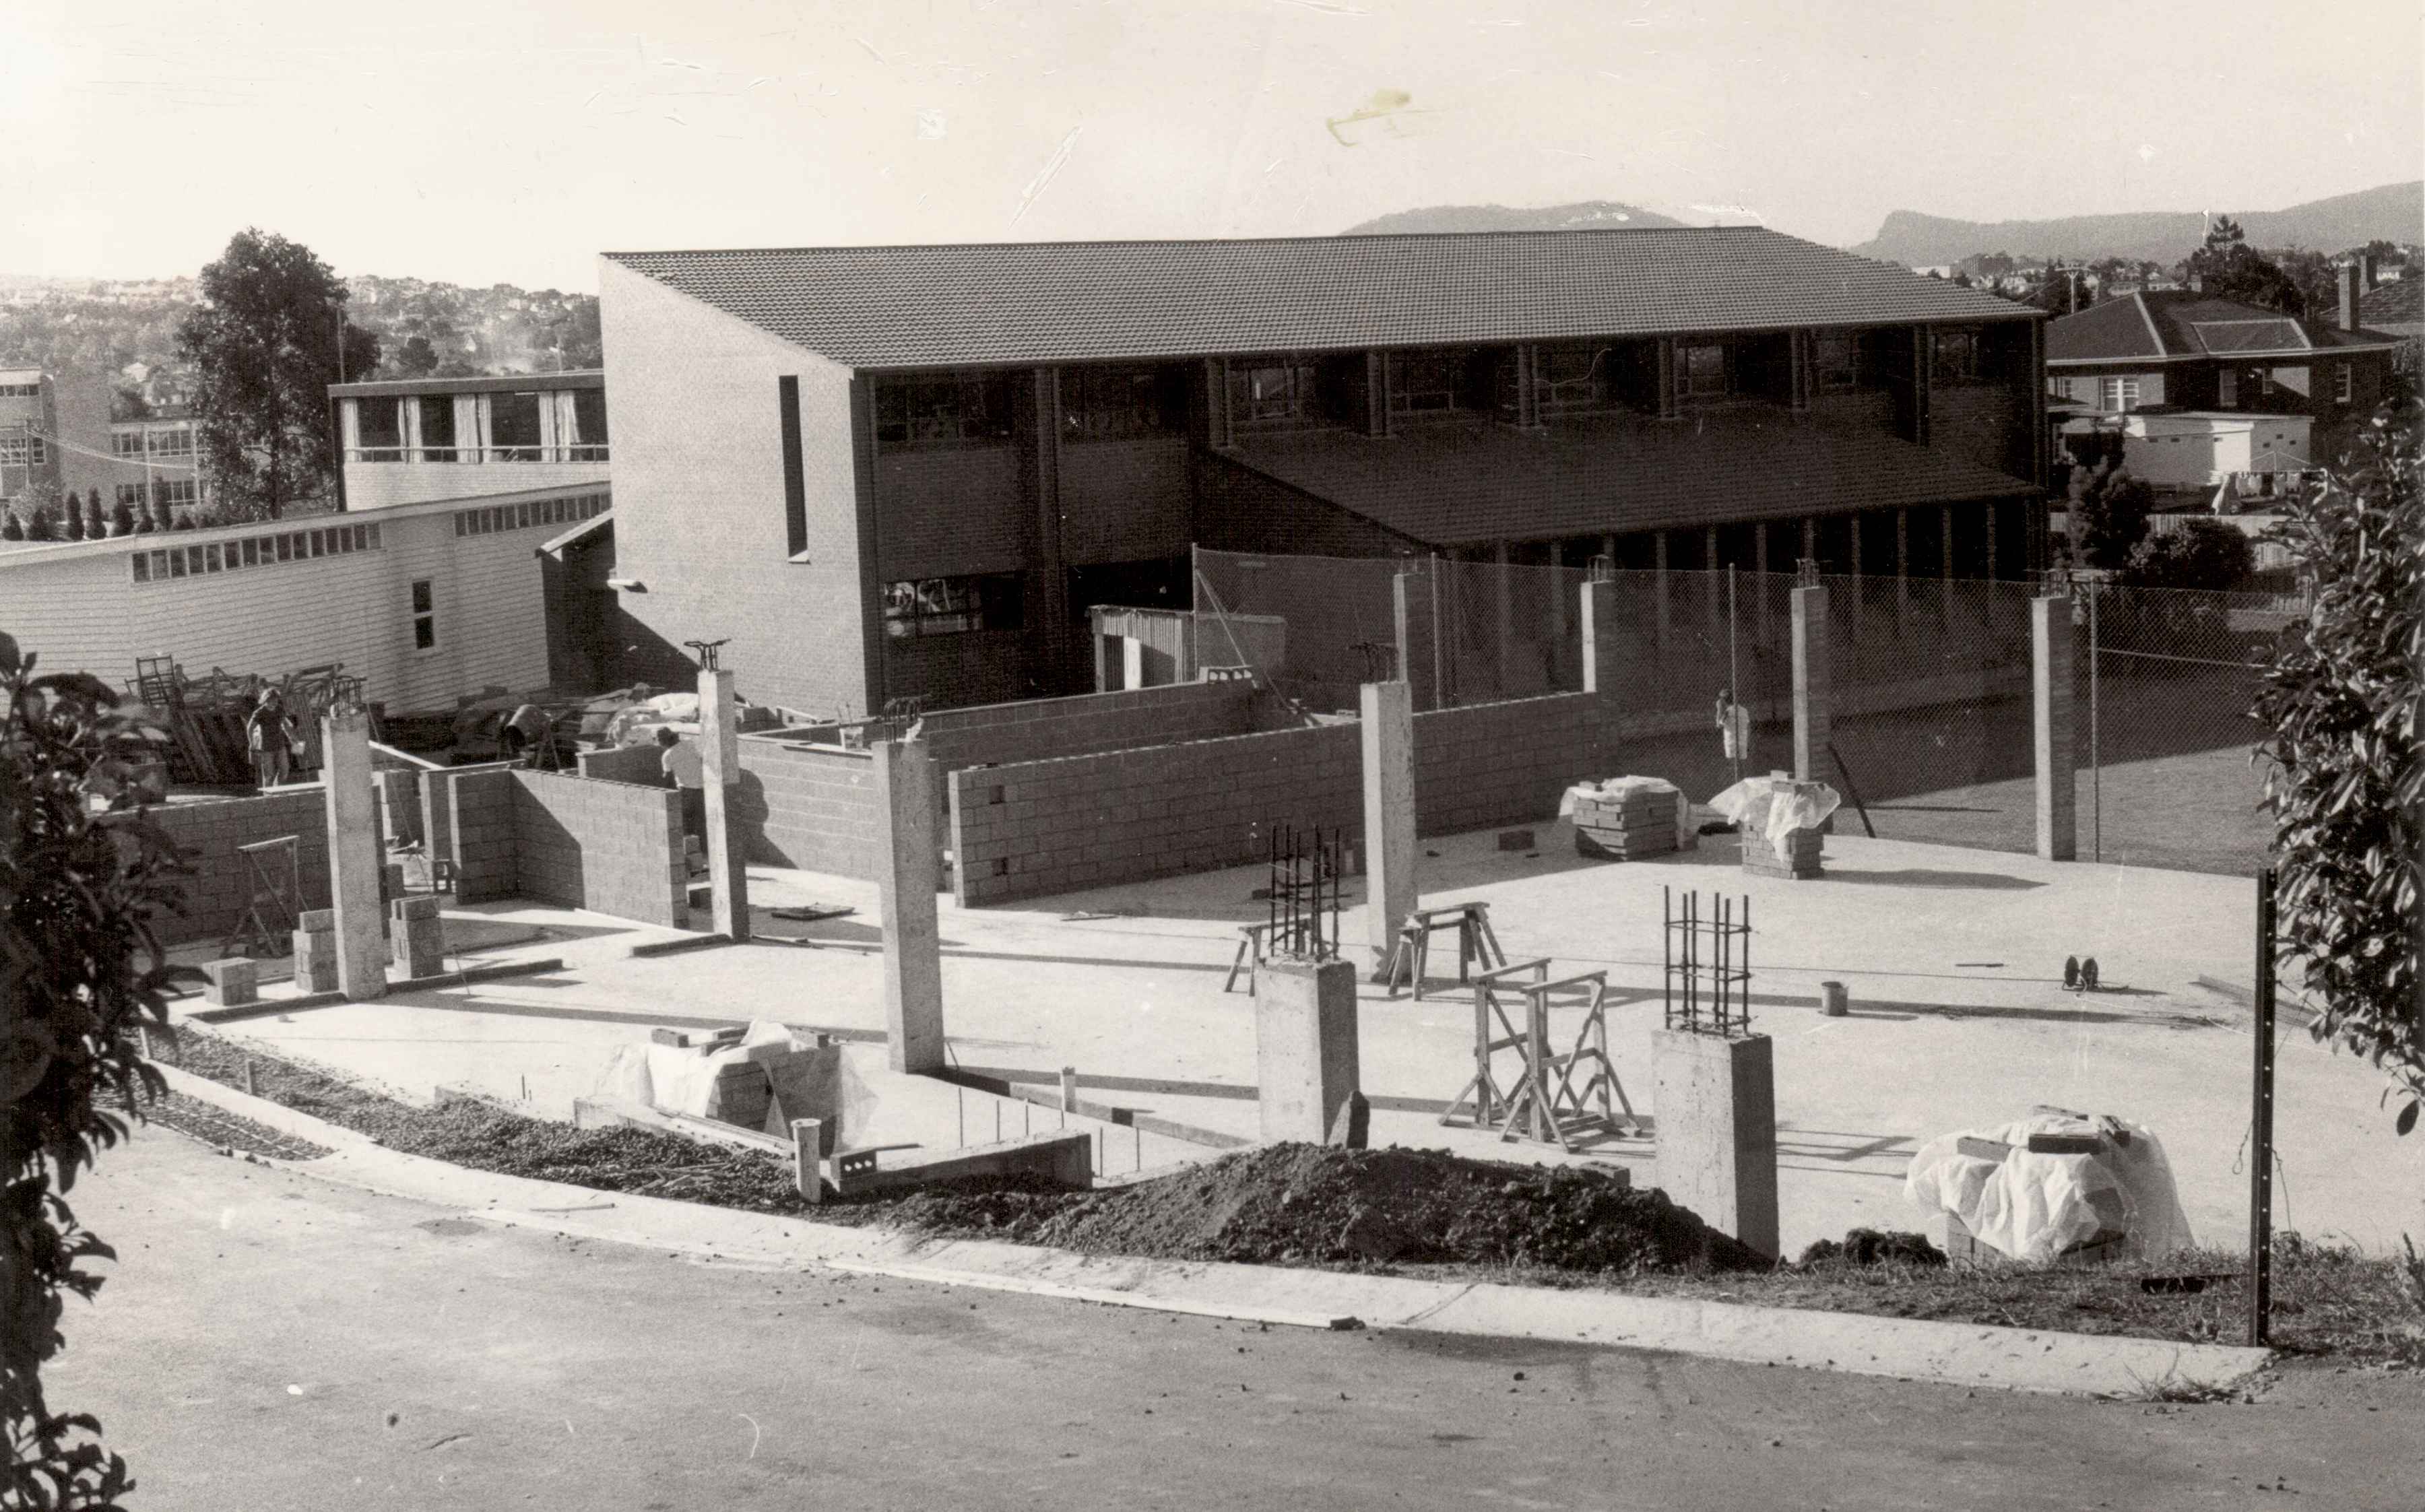 Construction of the Auditorium and Middle School, 1980.